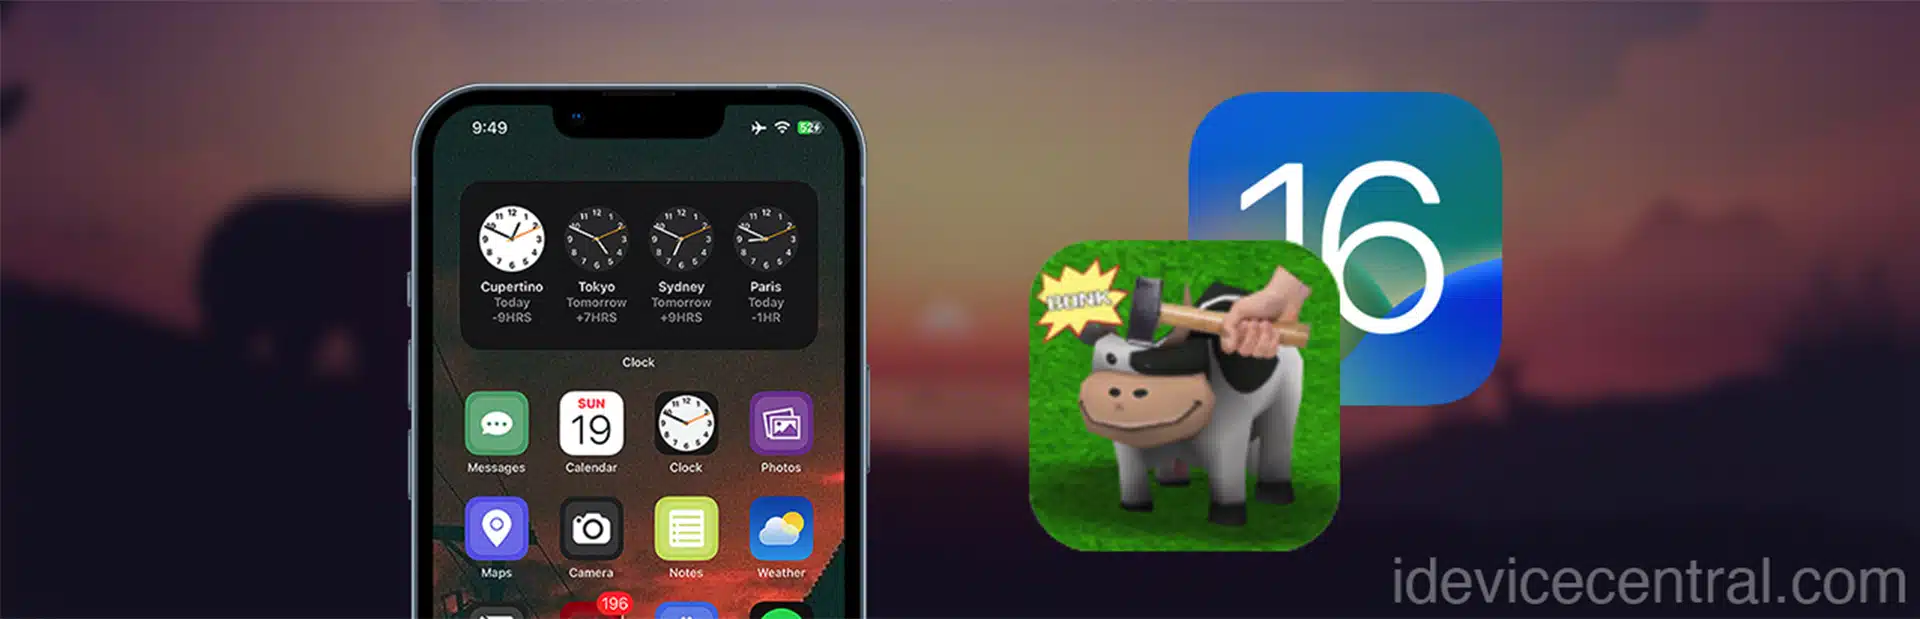 Cowabunga Lite For iOS 16.2 – 16.4 Released in Beta! Install Tweaks and Themes Without Jailbreak